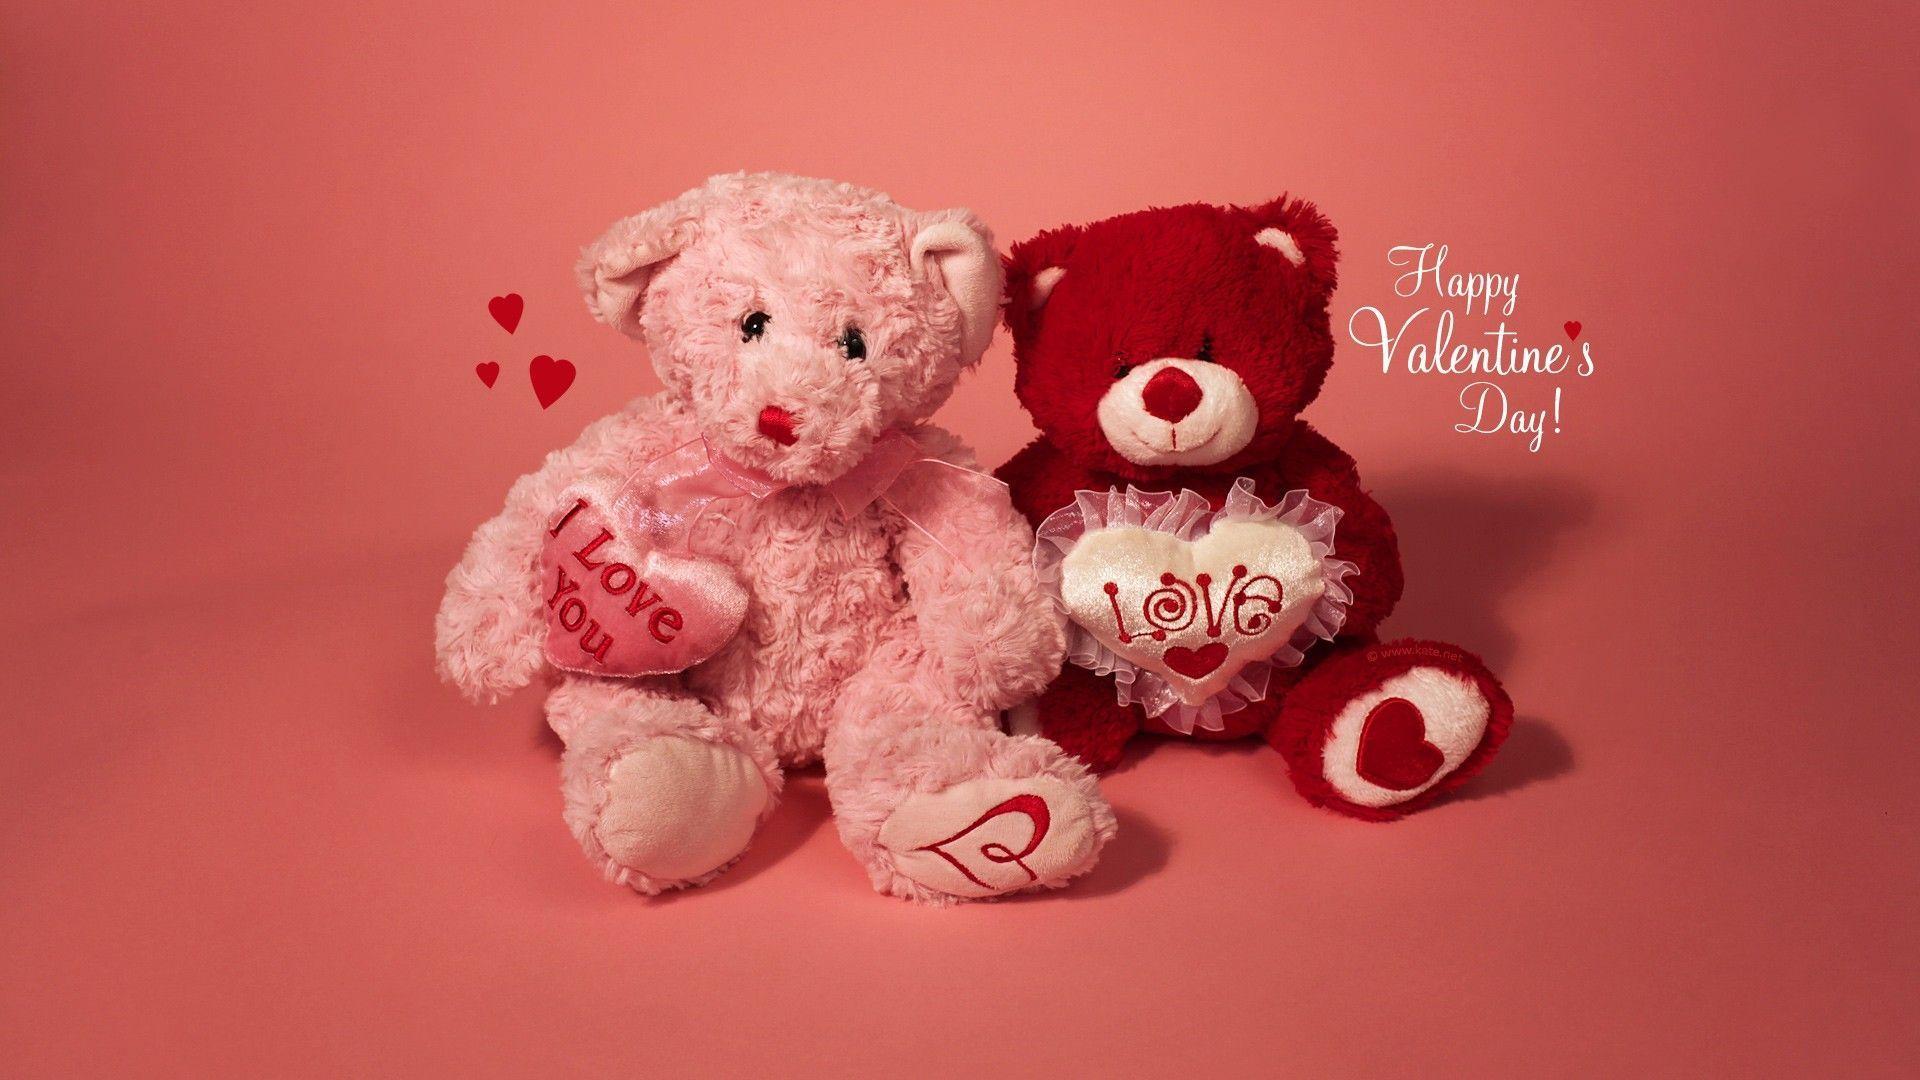 Cute Valentines Day Sayings For Friends Wallpaper. LoveWallpaperHD